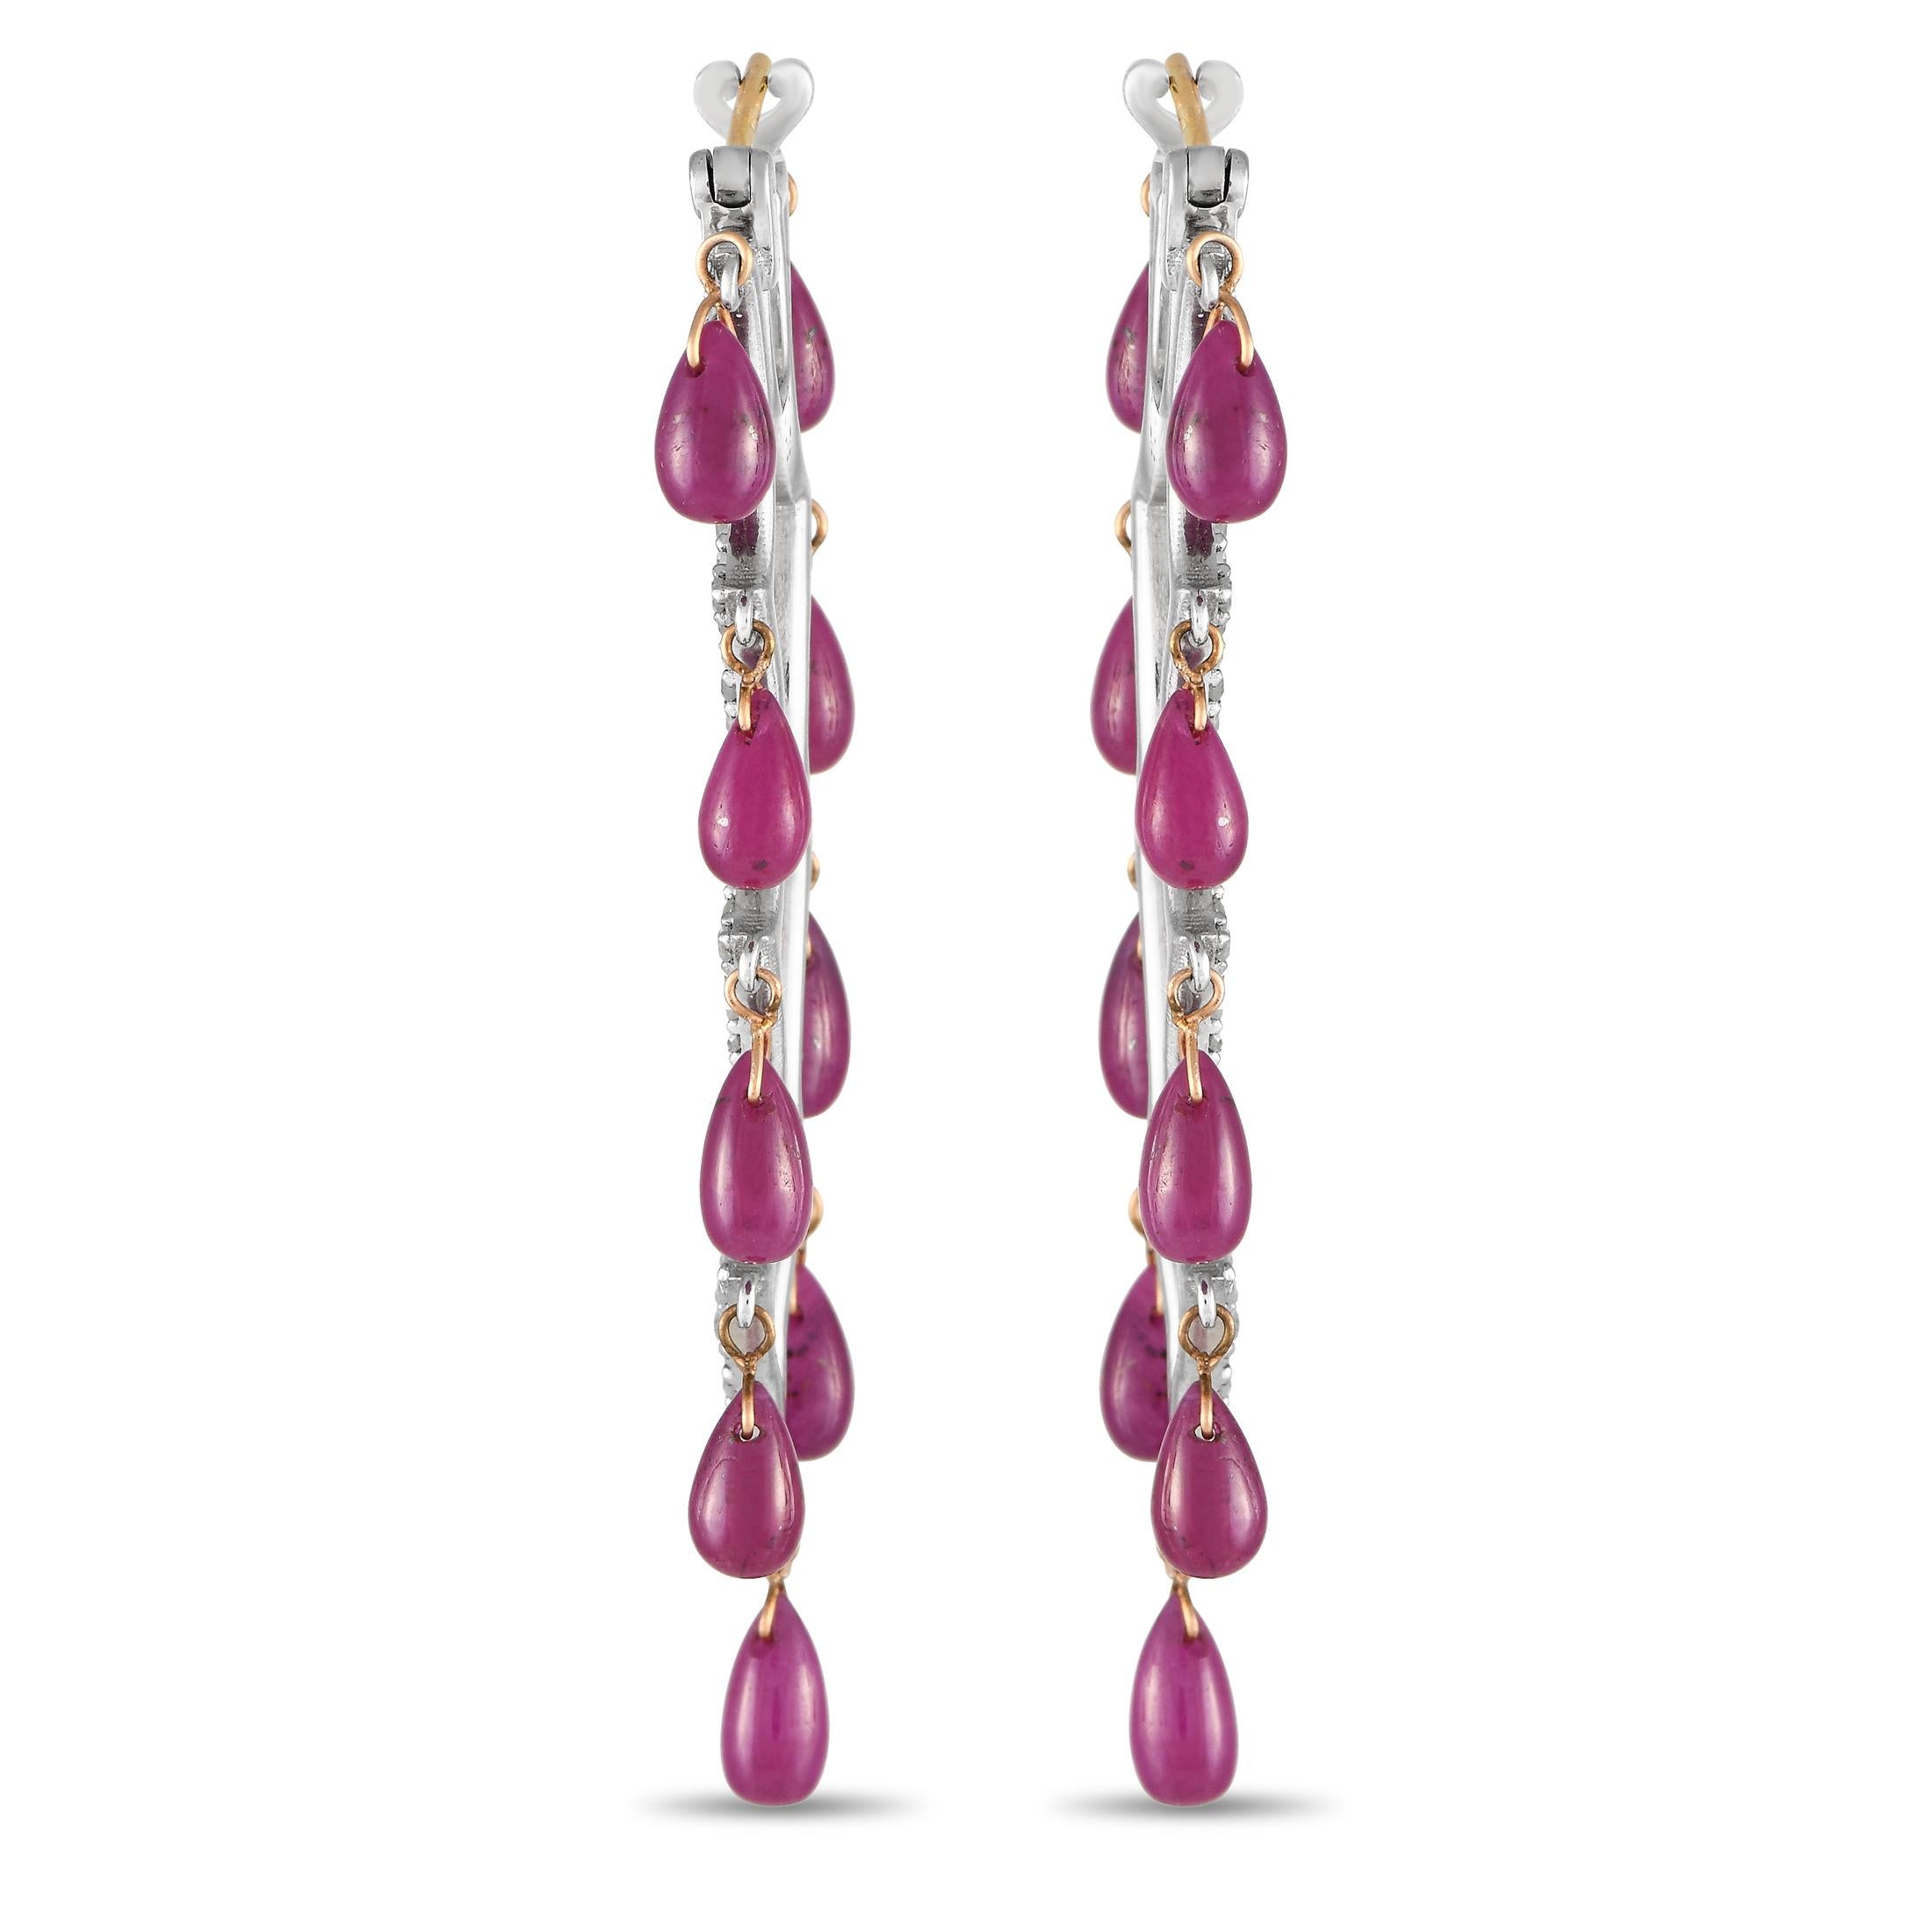 14K Yellow Gold and Silver 1.29ct Diamond and Ruby Dangle Earrings MF02-020124 In Excellent Condition For Sale In Southampton, PA